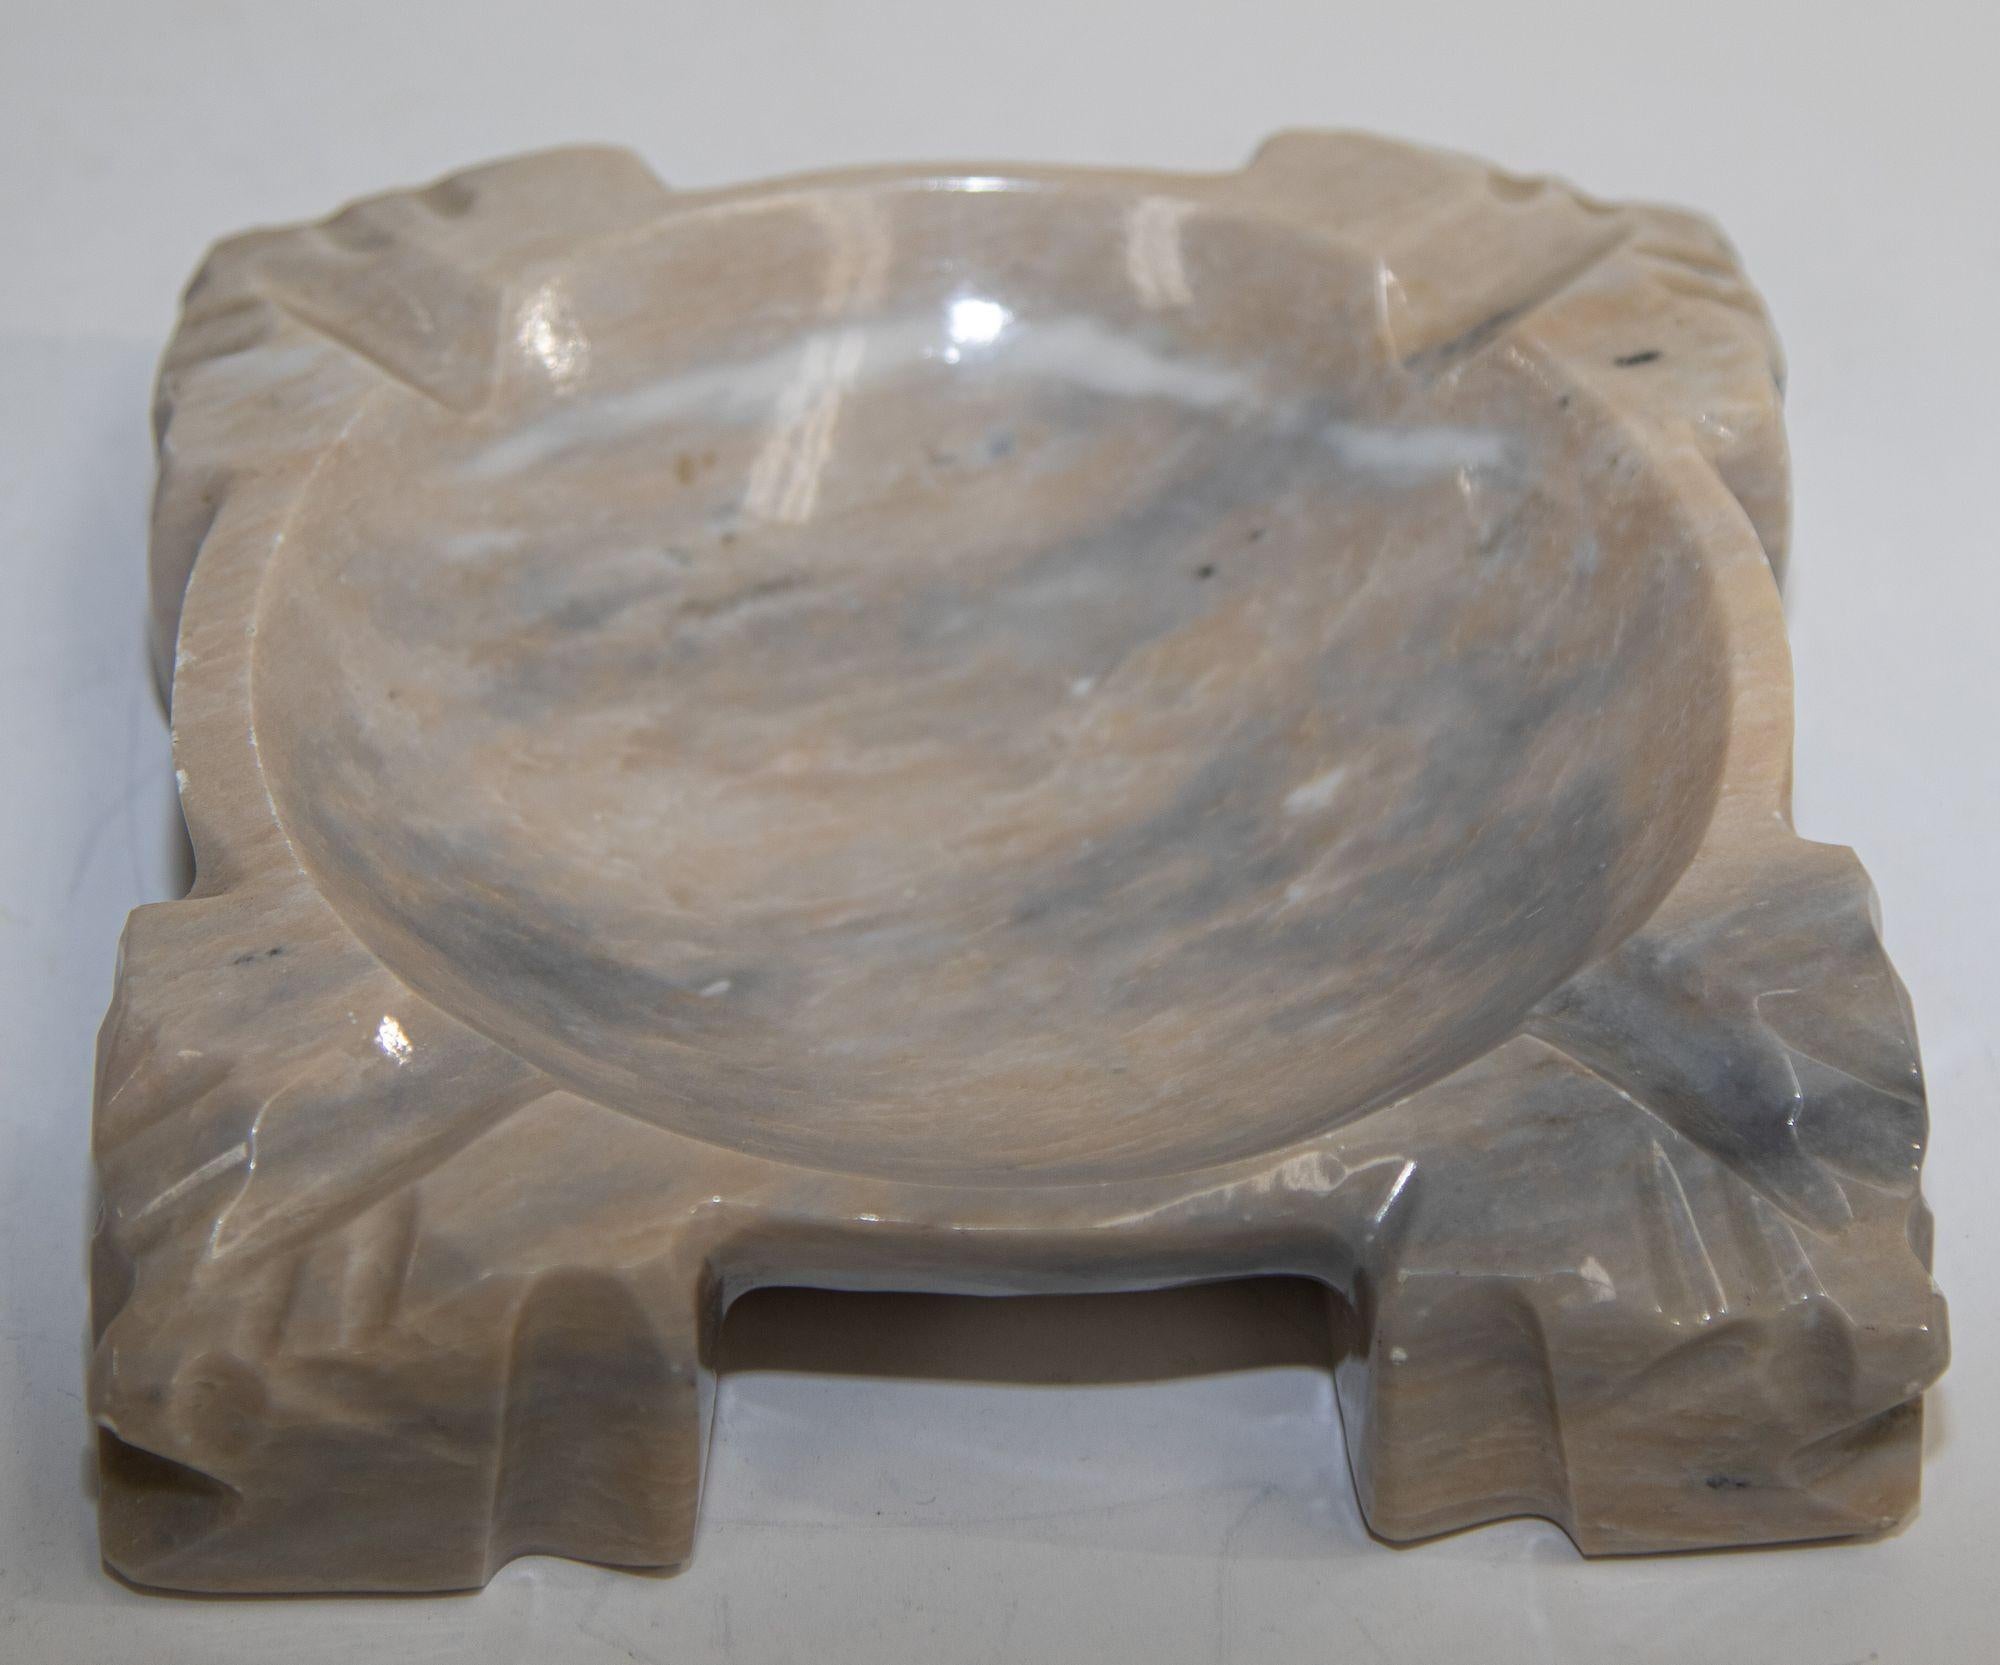 Vintage brown marble square ashtray Mayan Aztec hand carved in natural earth tones.
Great Post Modern style design on this hand carved polished marble, large ashtray circa 1960s-70s hand carved on each corner with some Aztec figures.
The ashtray is